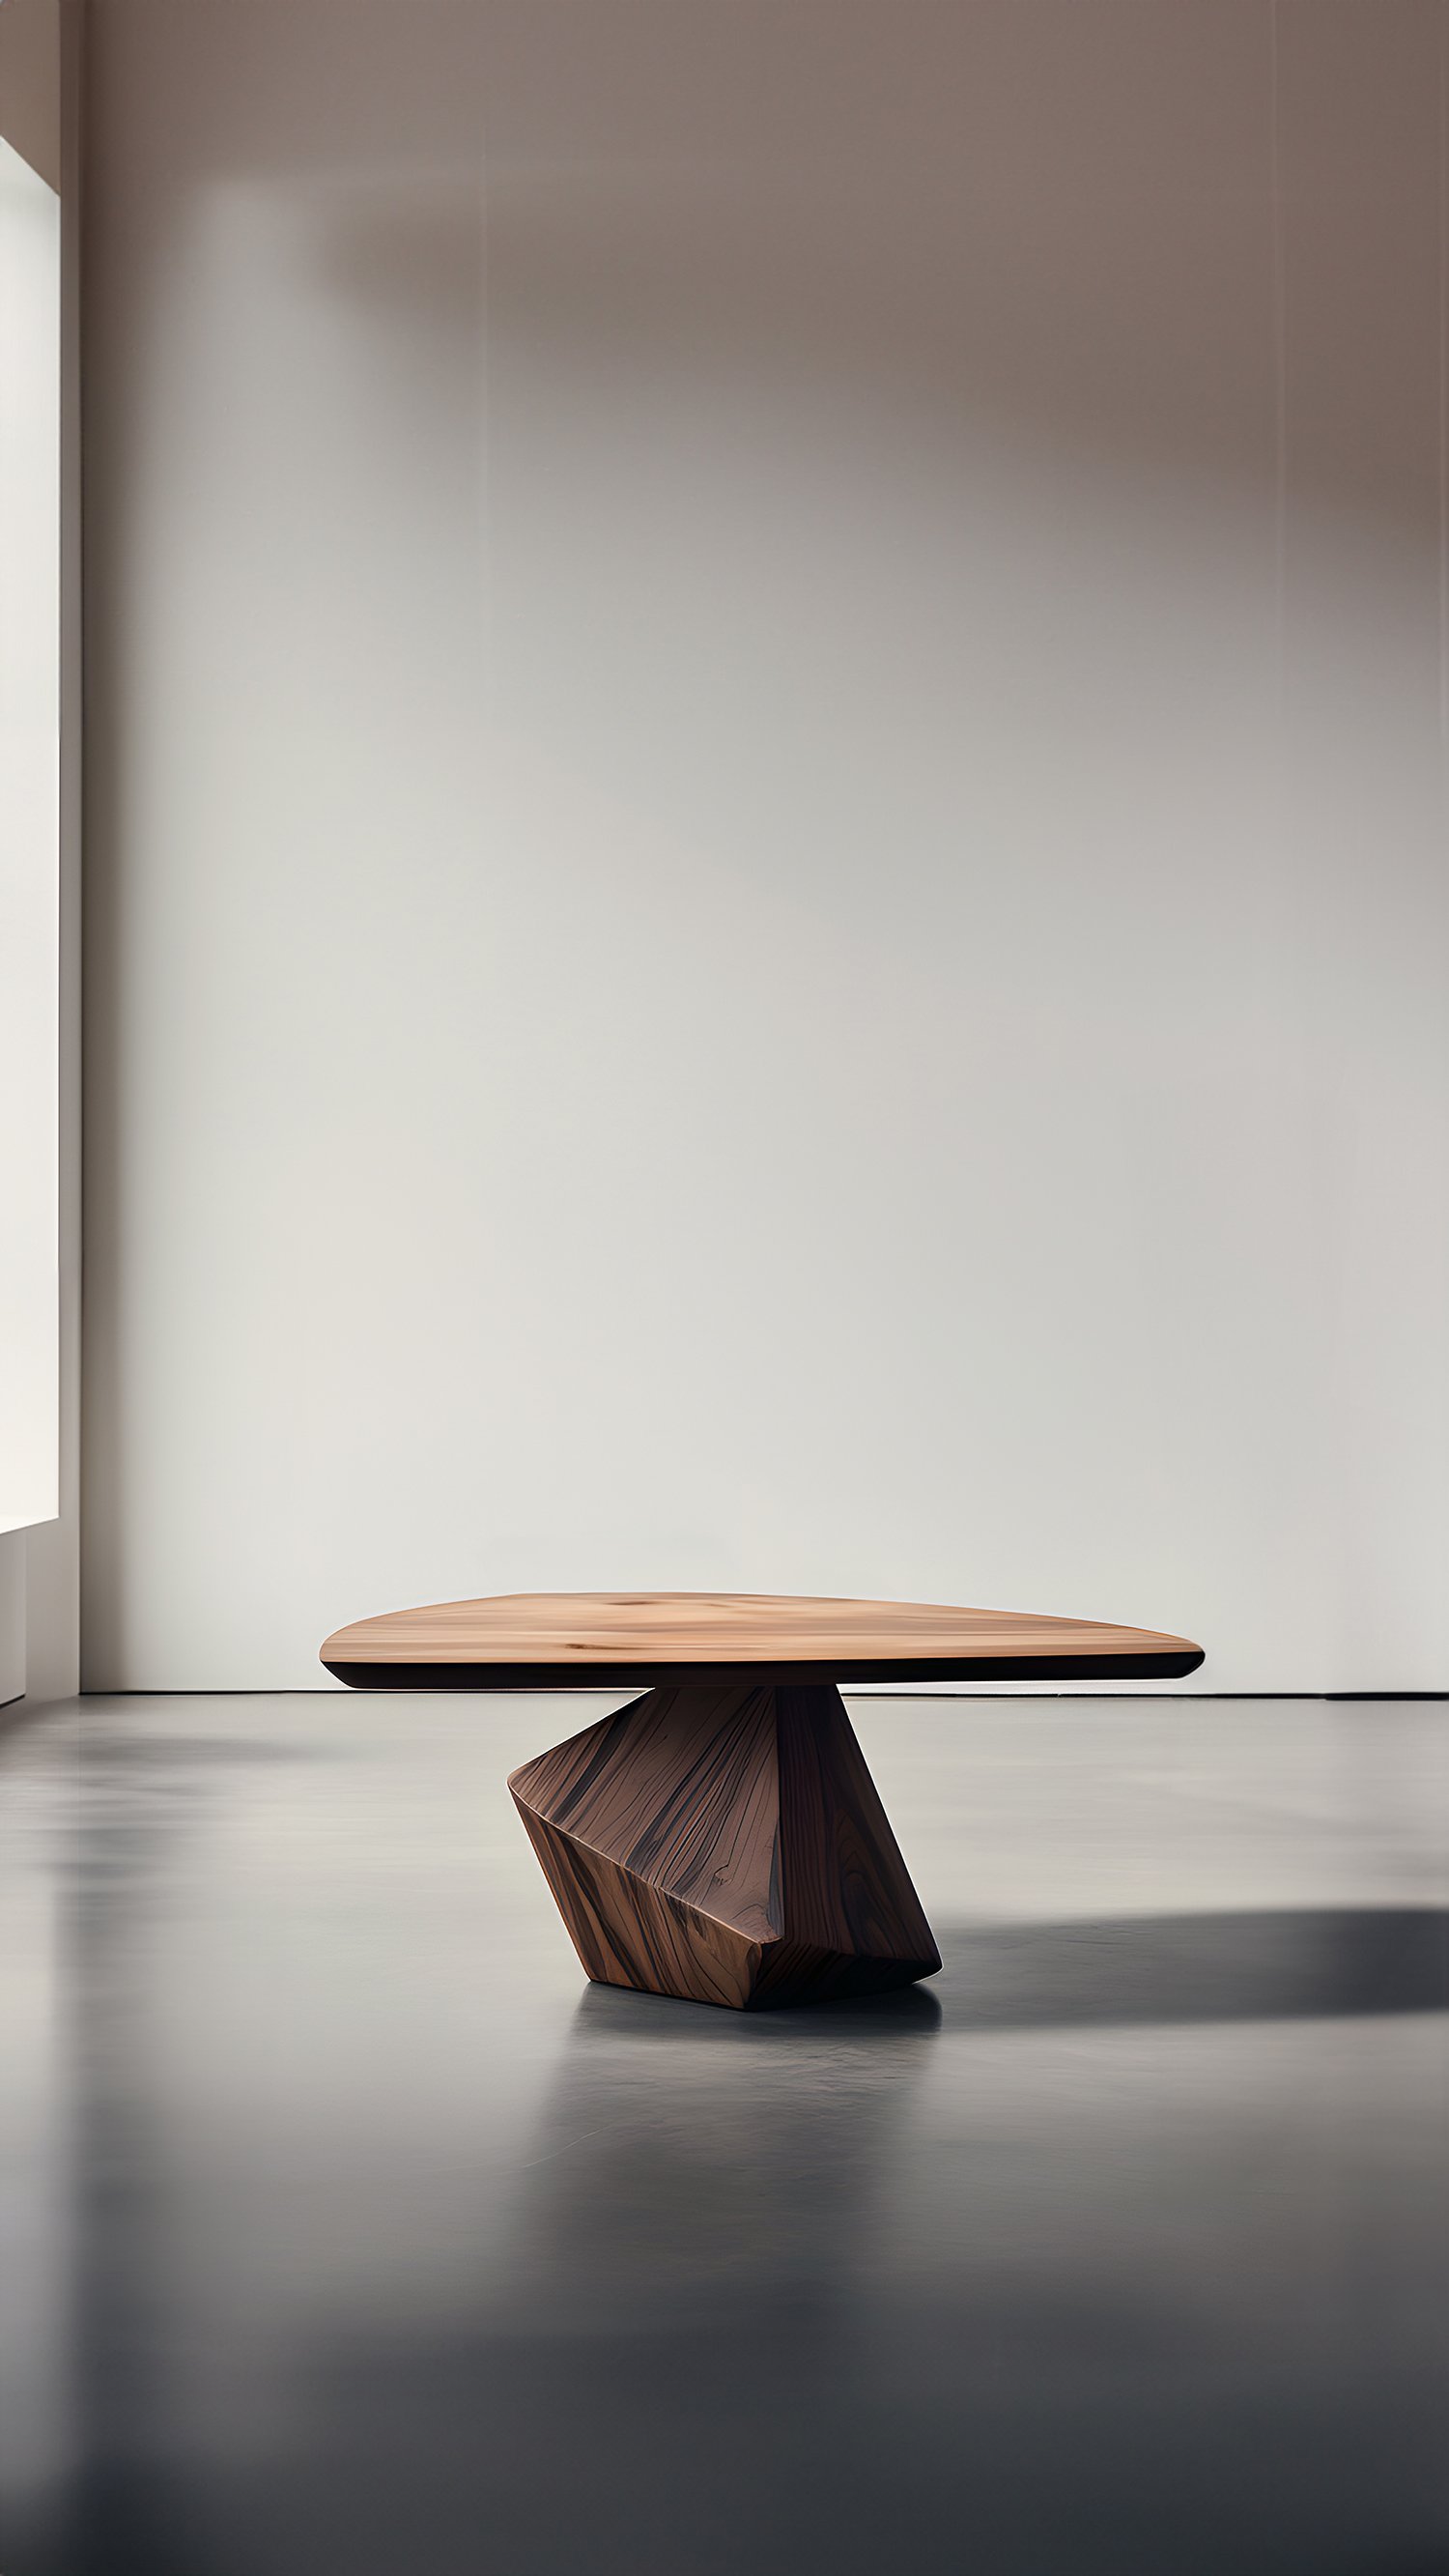 Sculptural Coffee Table Made of Solid Wood, Center Table Solace S30 by Joel Escalona — 9.jpg